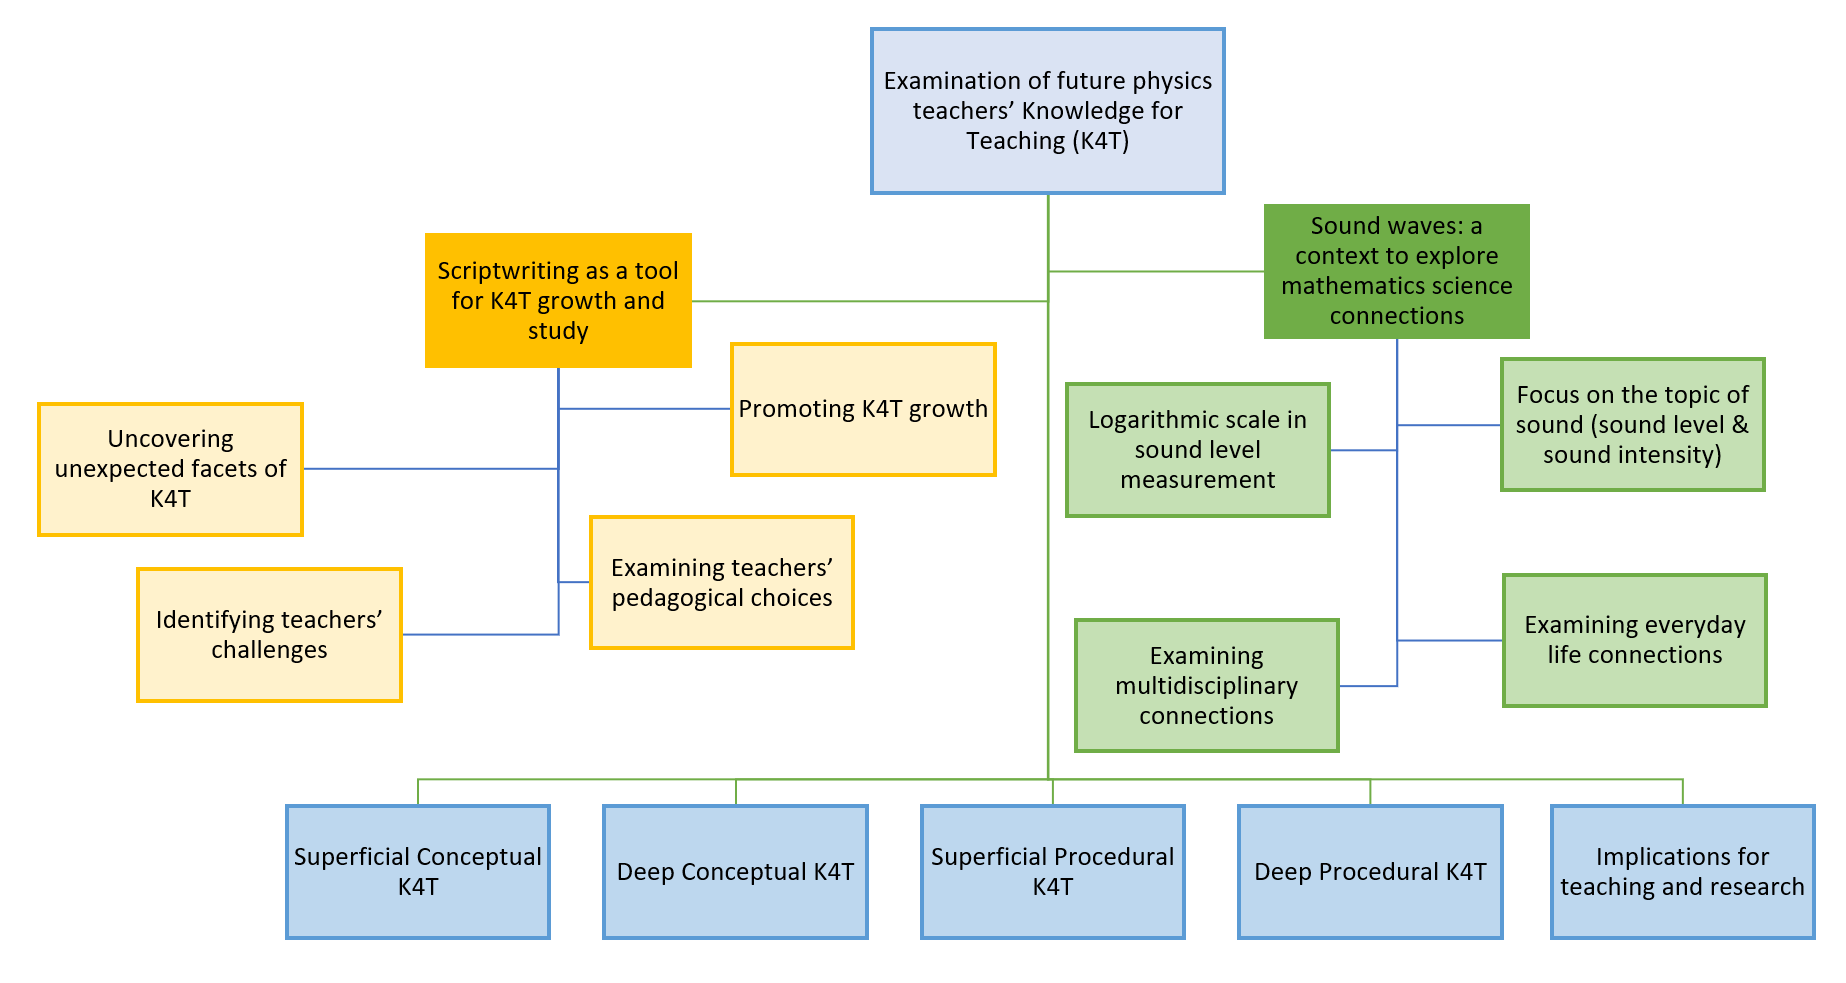 Cover image of the article. A flowchart of the whole work.